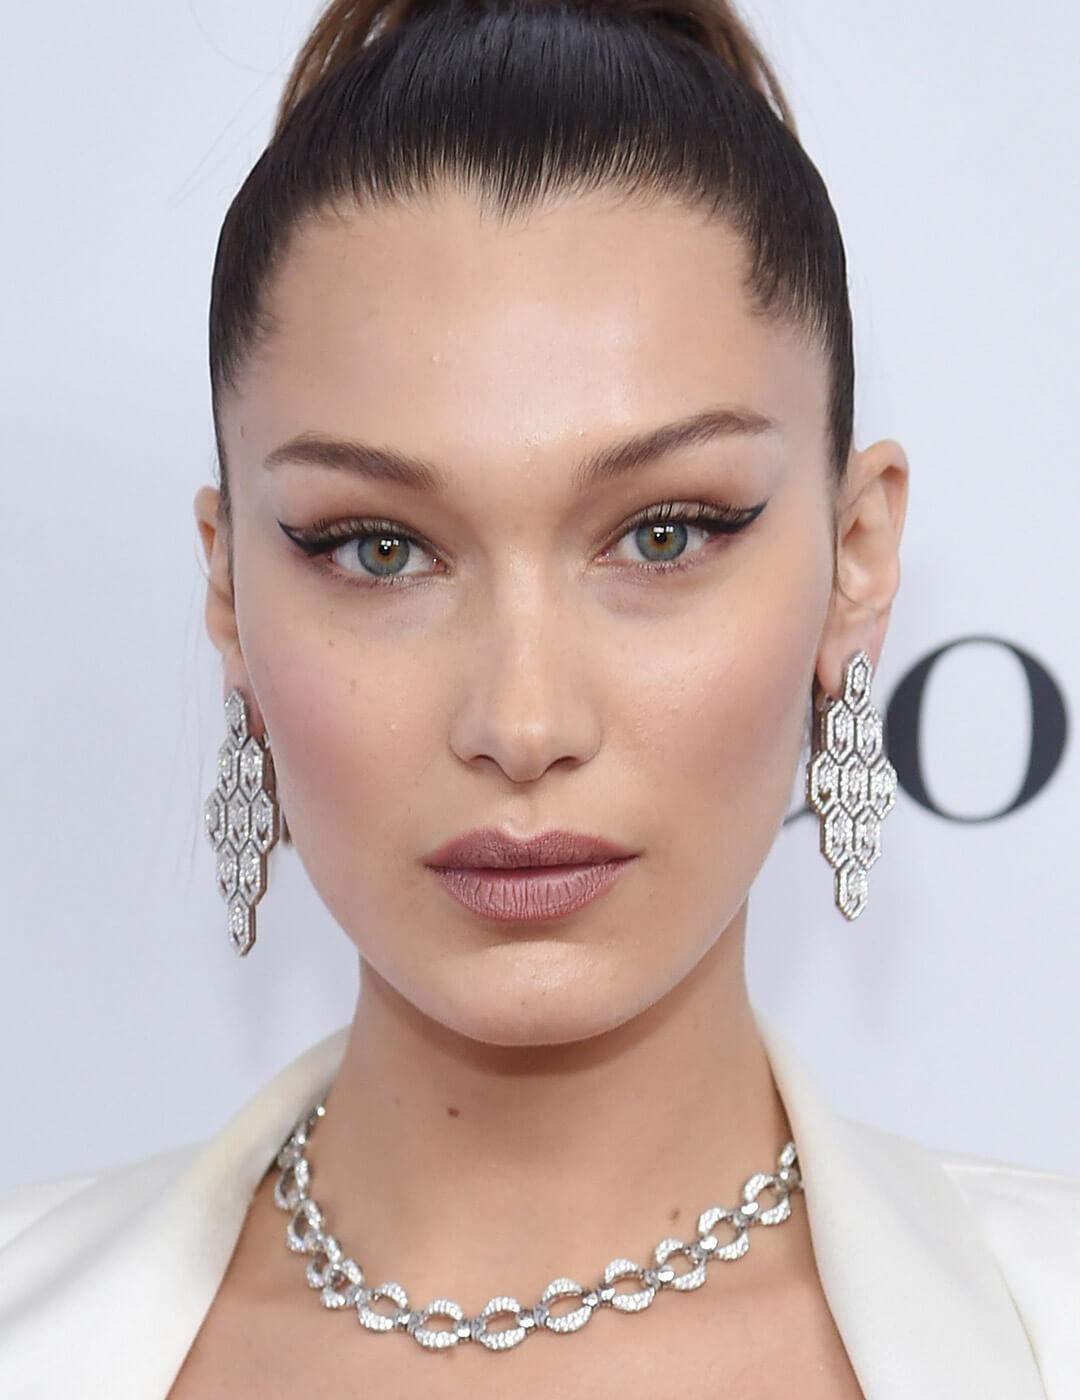 Bella Hadid looking fierce in a white dress, silver necklace and earrings, and a negative space eyeliner makeup look